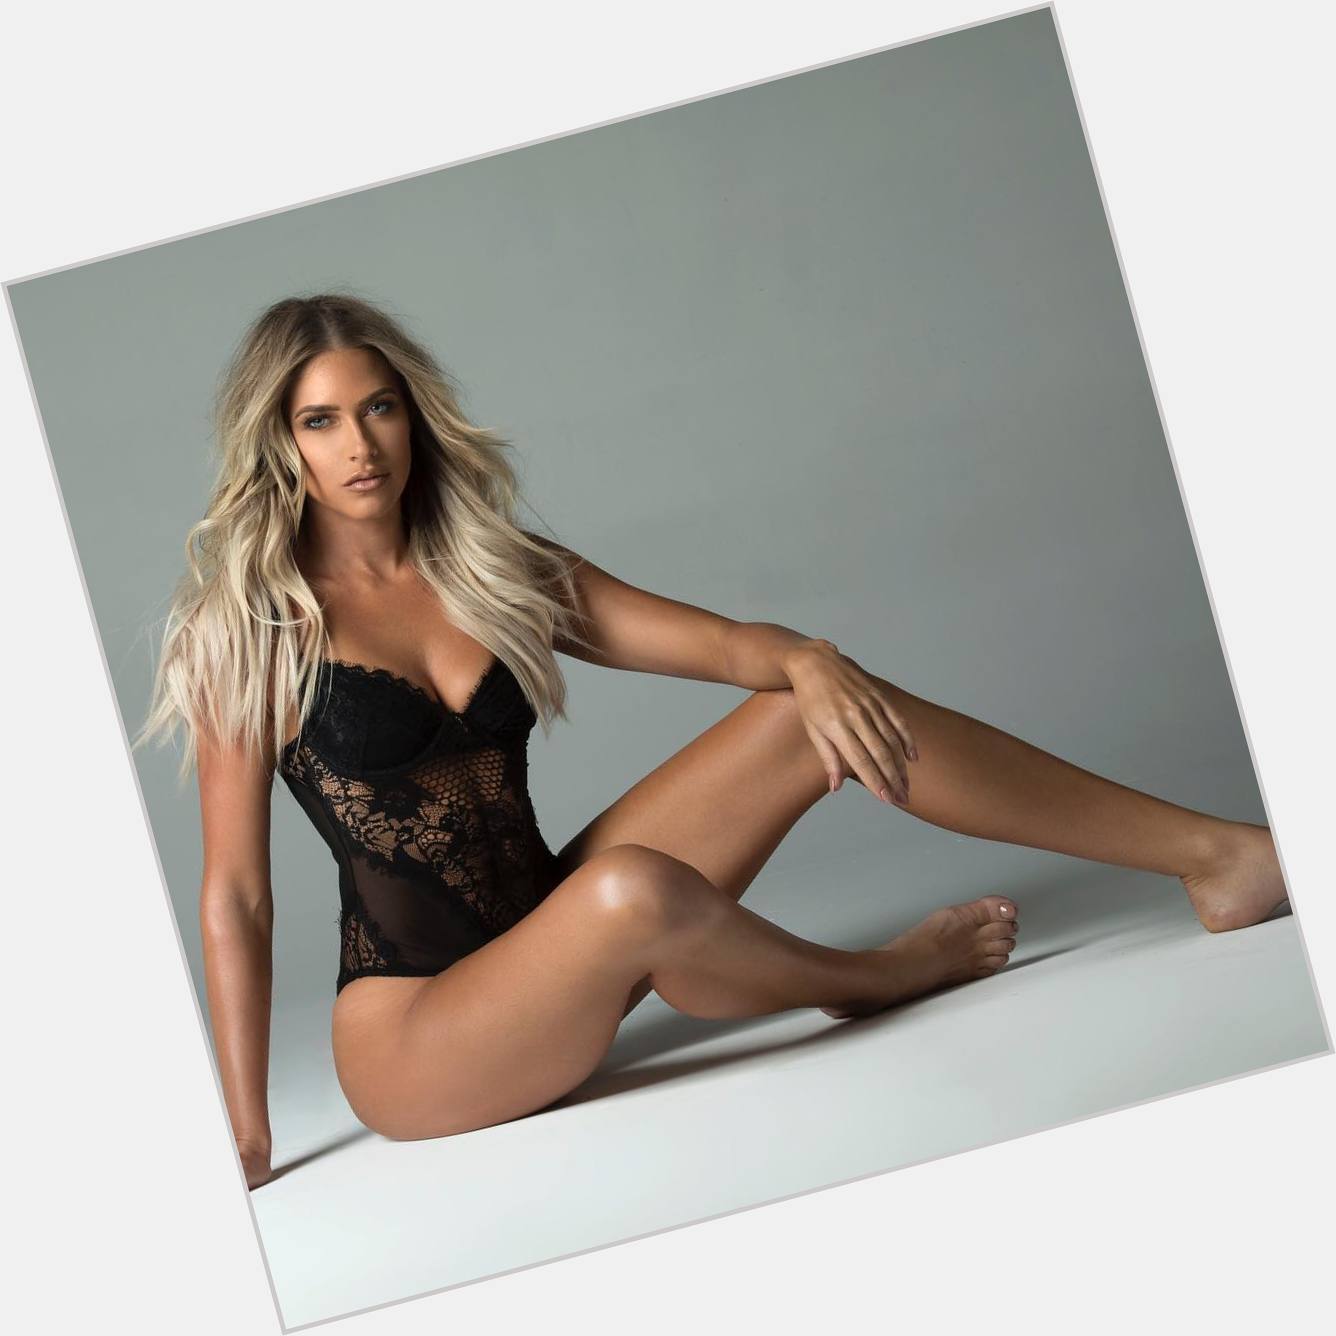 Happy Birthday to former WWE star Kelly Kelly who turns 31 today! 